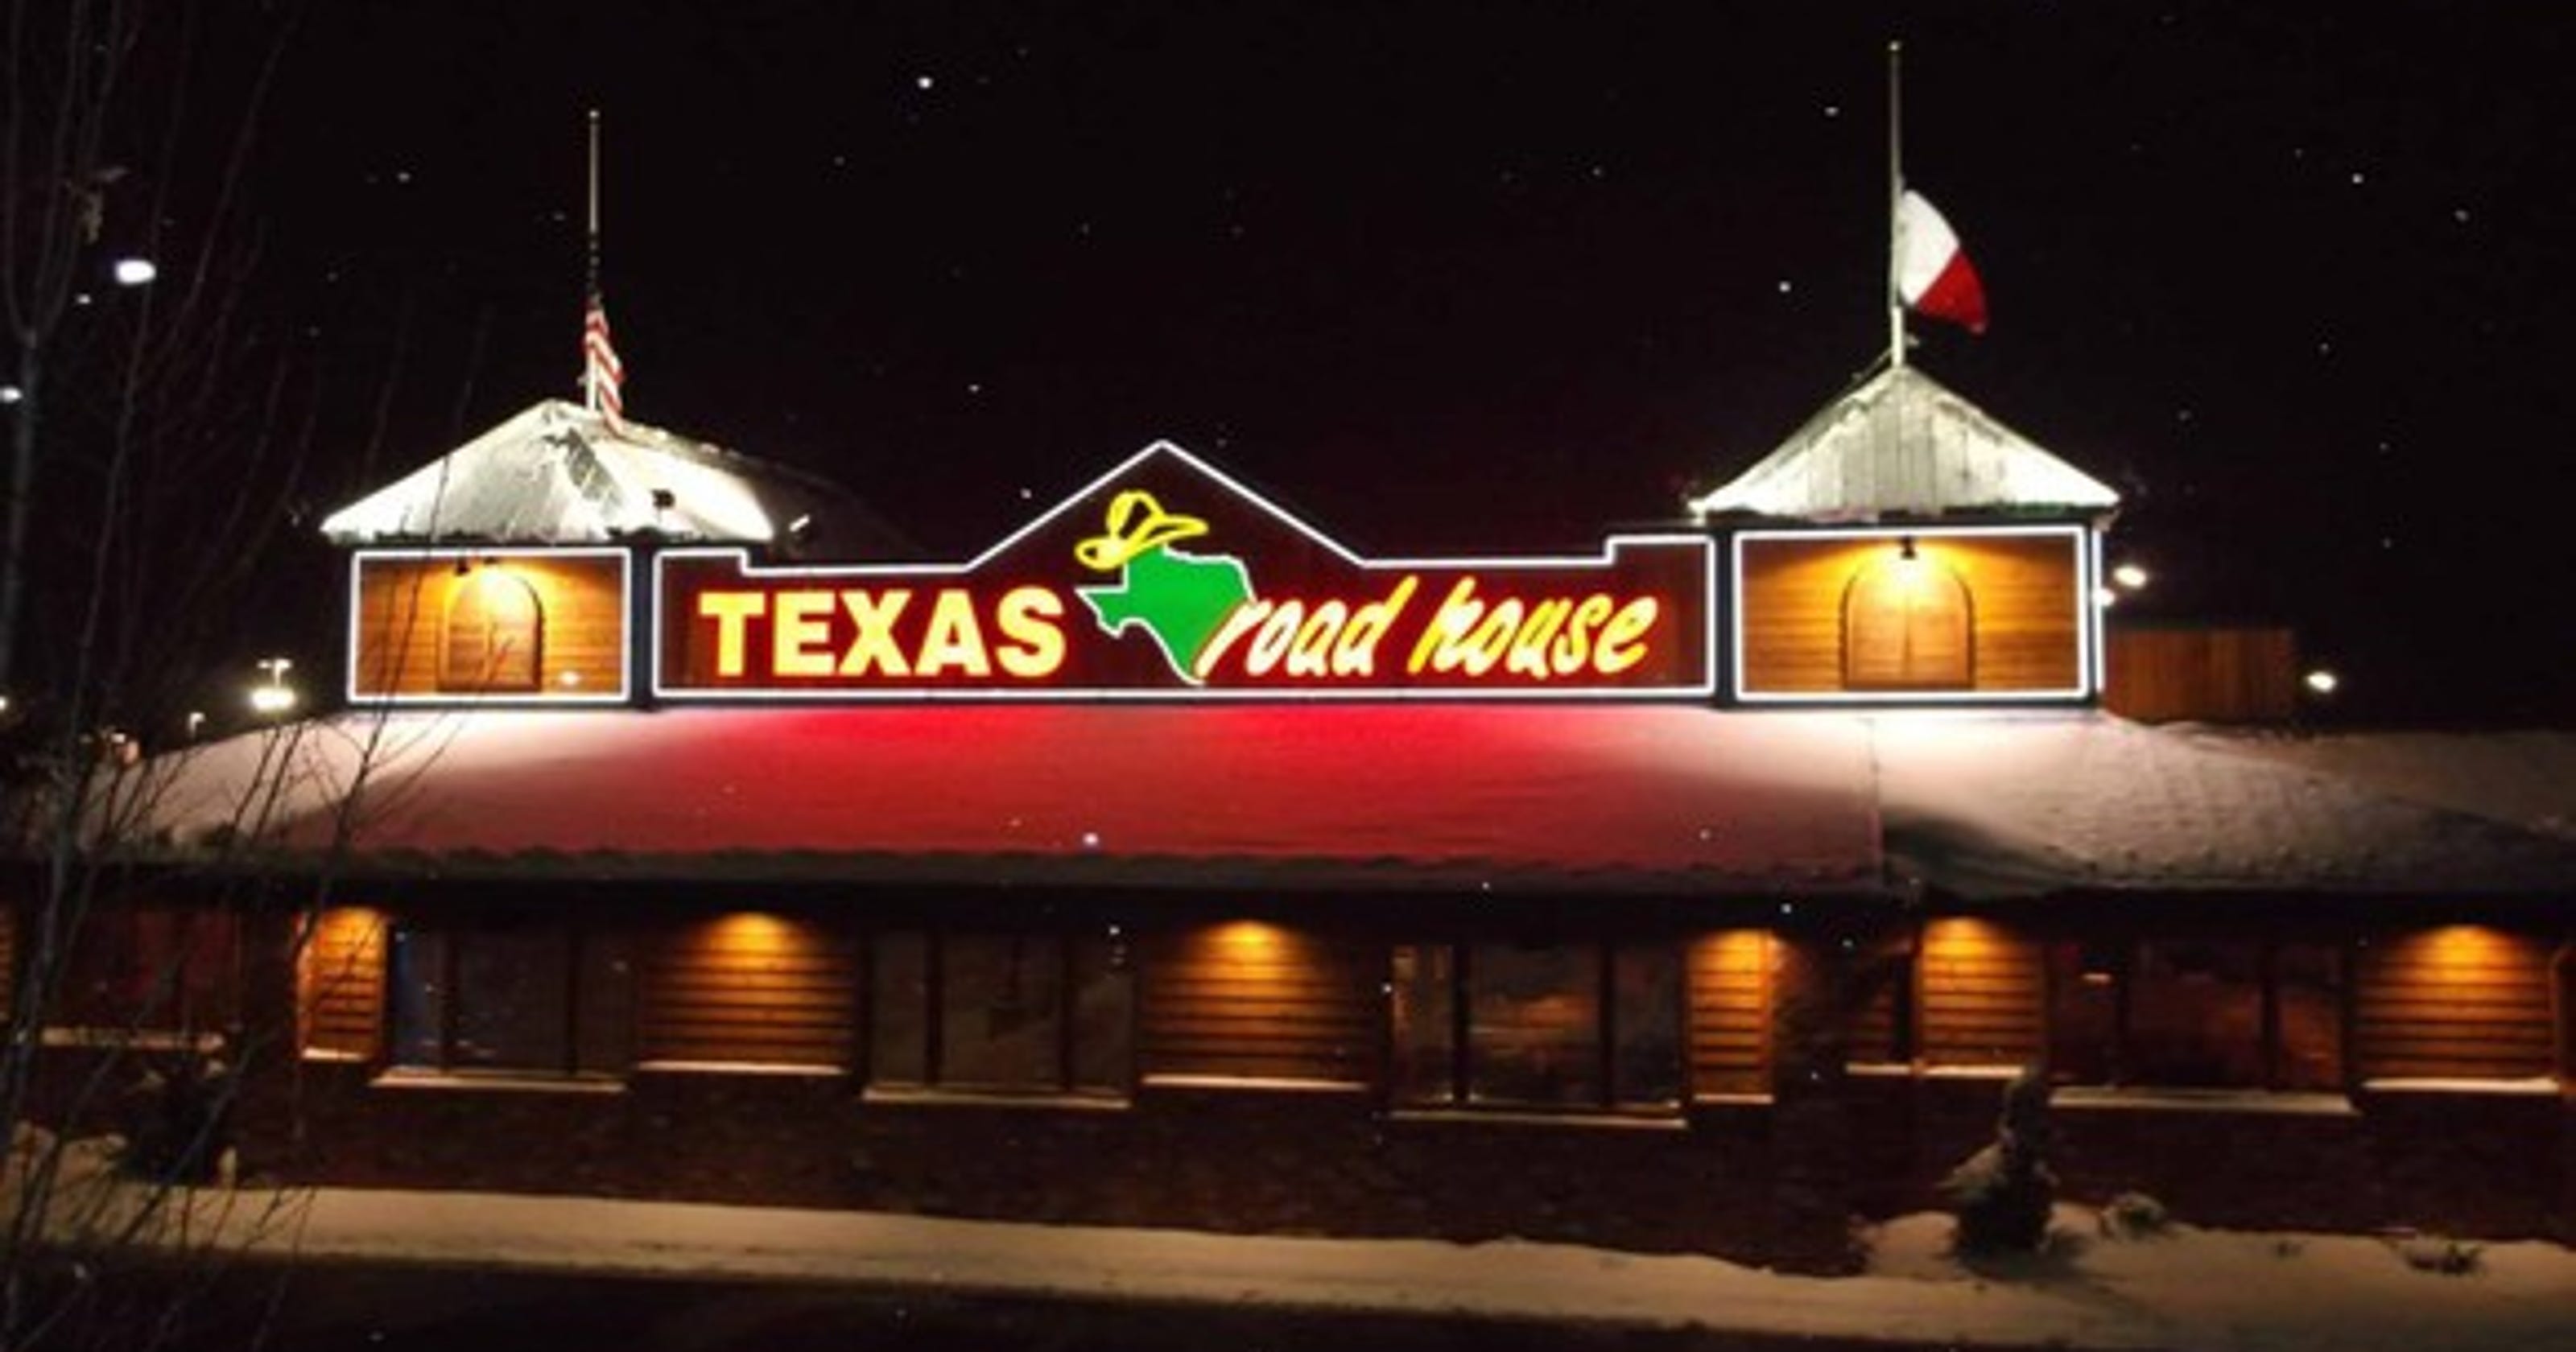 Eat at Texas Roadhouse on Wednesday, benefit the Red Cross